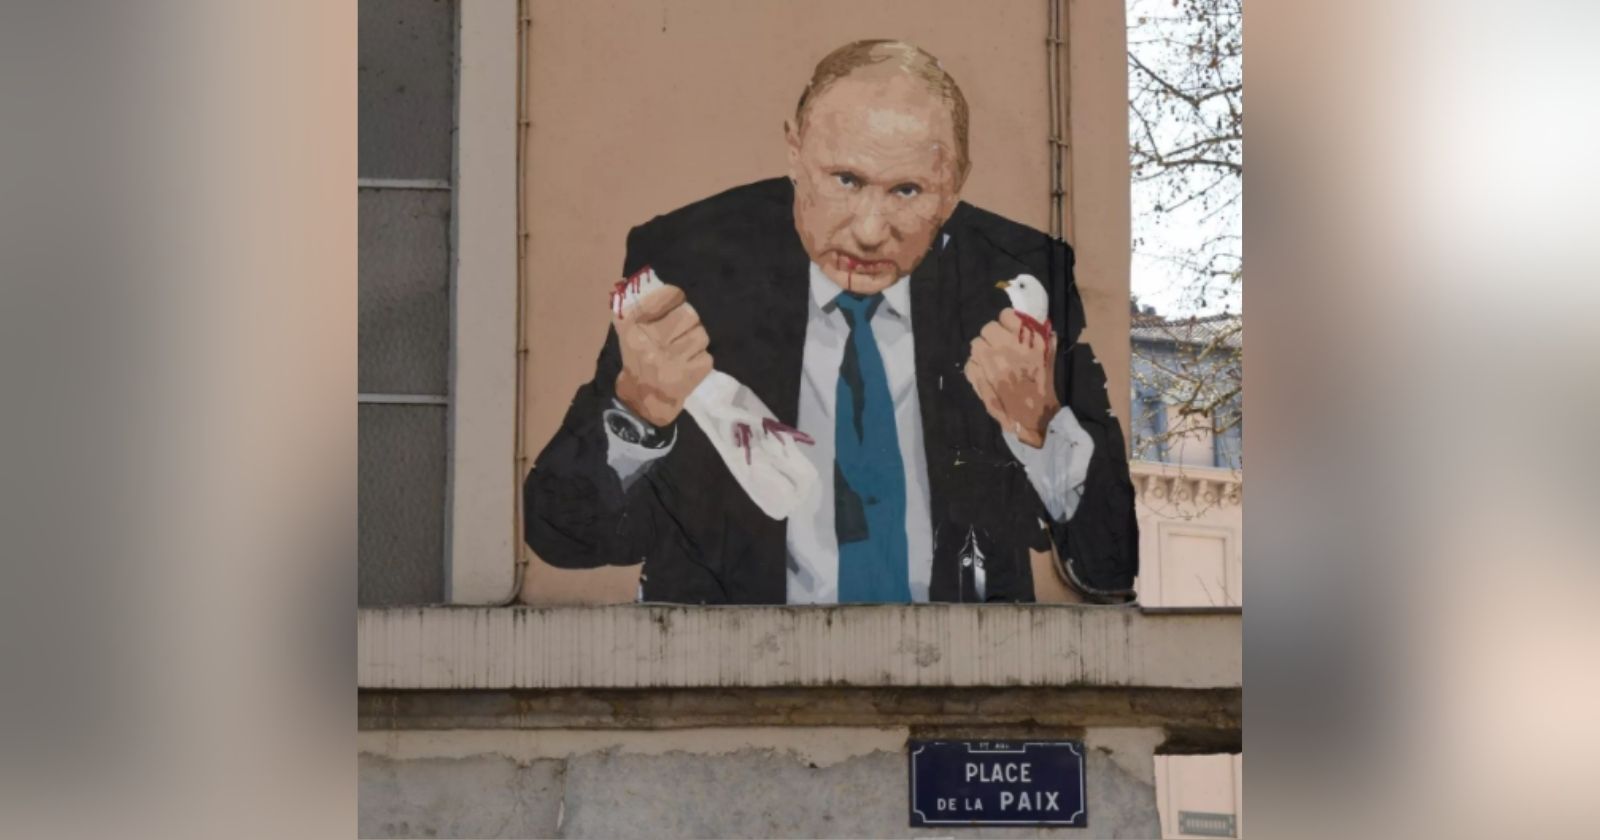 Lyon: a striking and symbolic collage with Vladimir Poutine installed place de la Paix